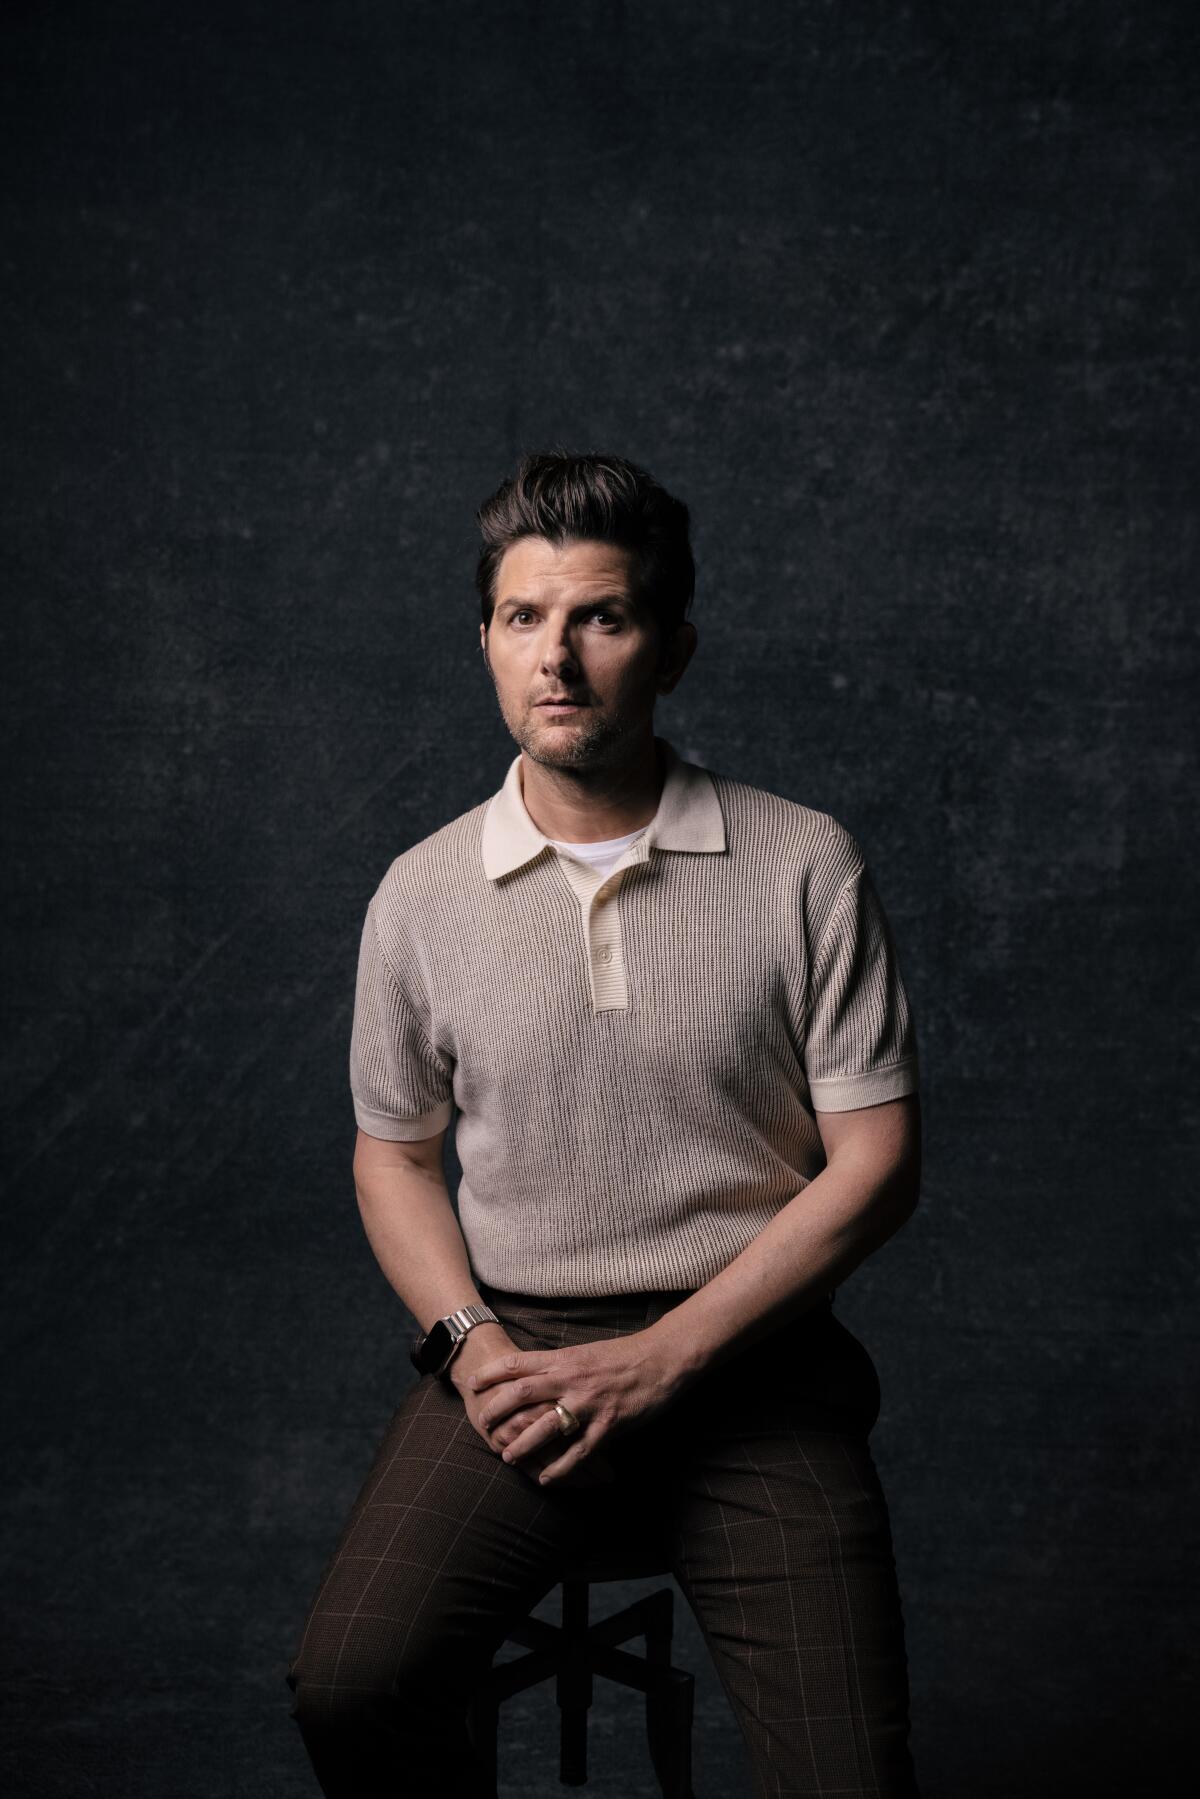 Actor Adam Scott sits on a stool in front of a dark background for a portrait.